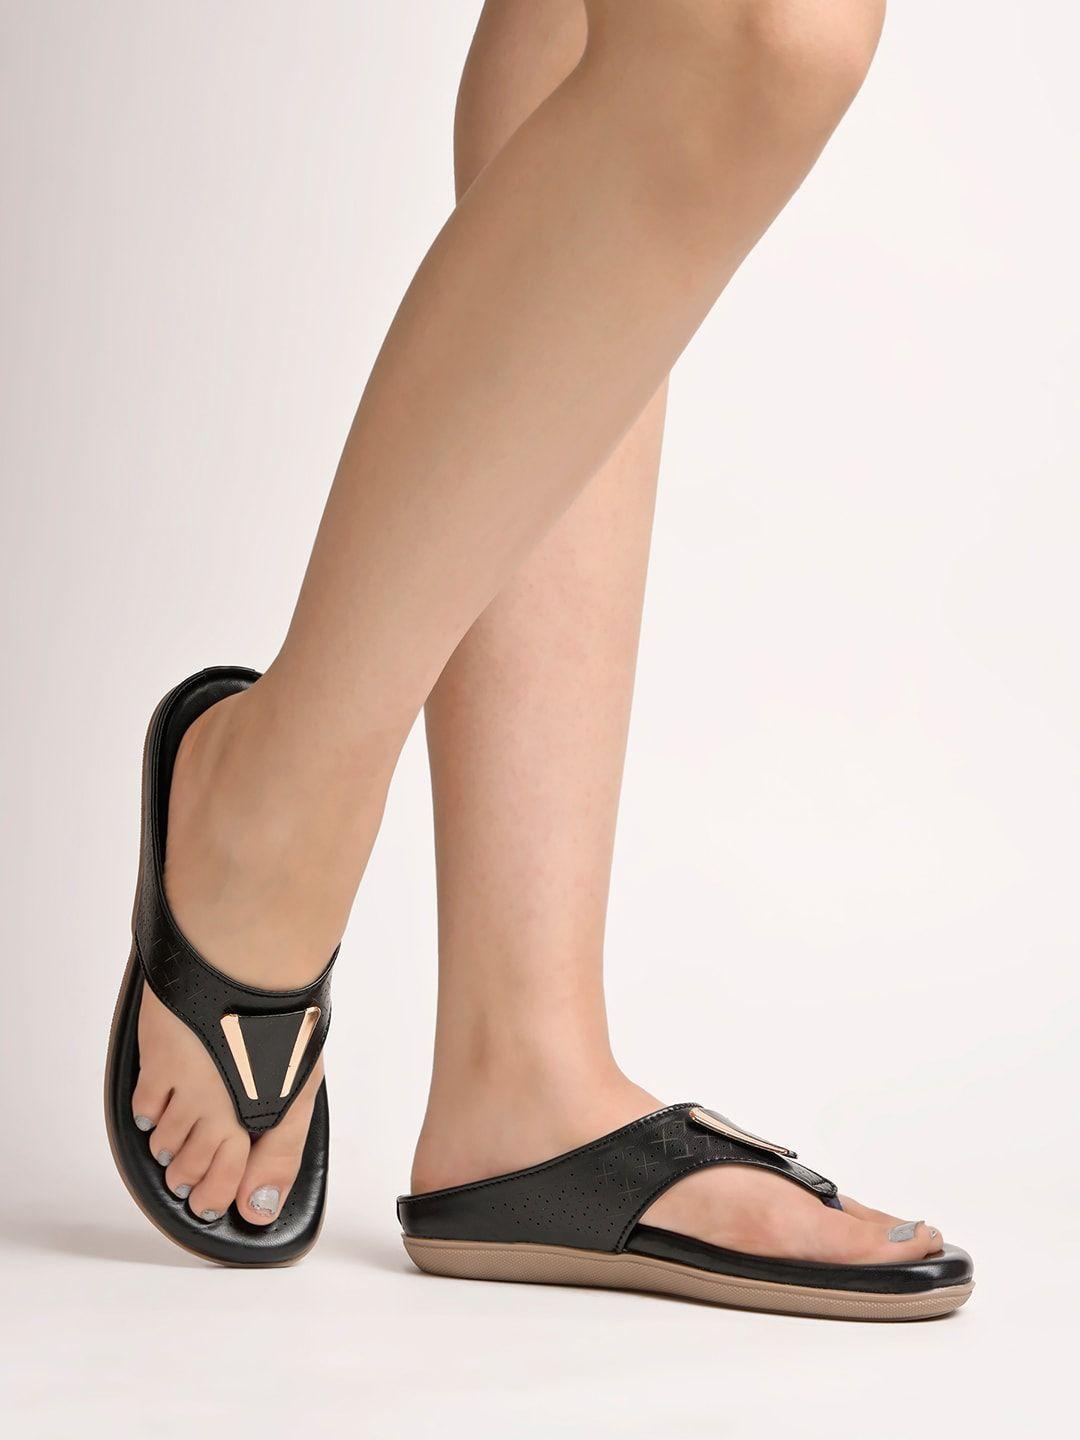 shoetopia textured open toe flats with laser cuts